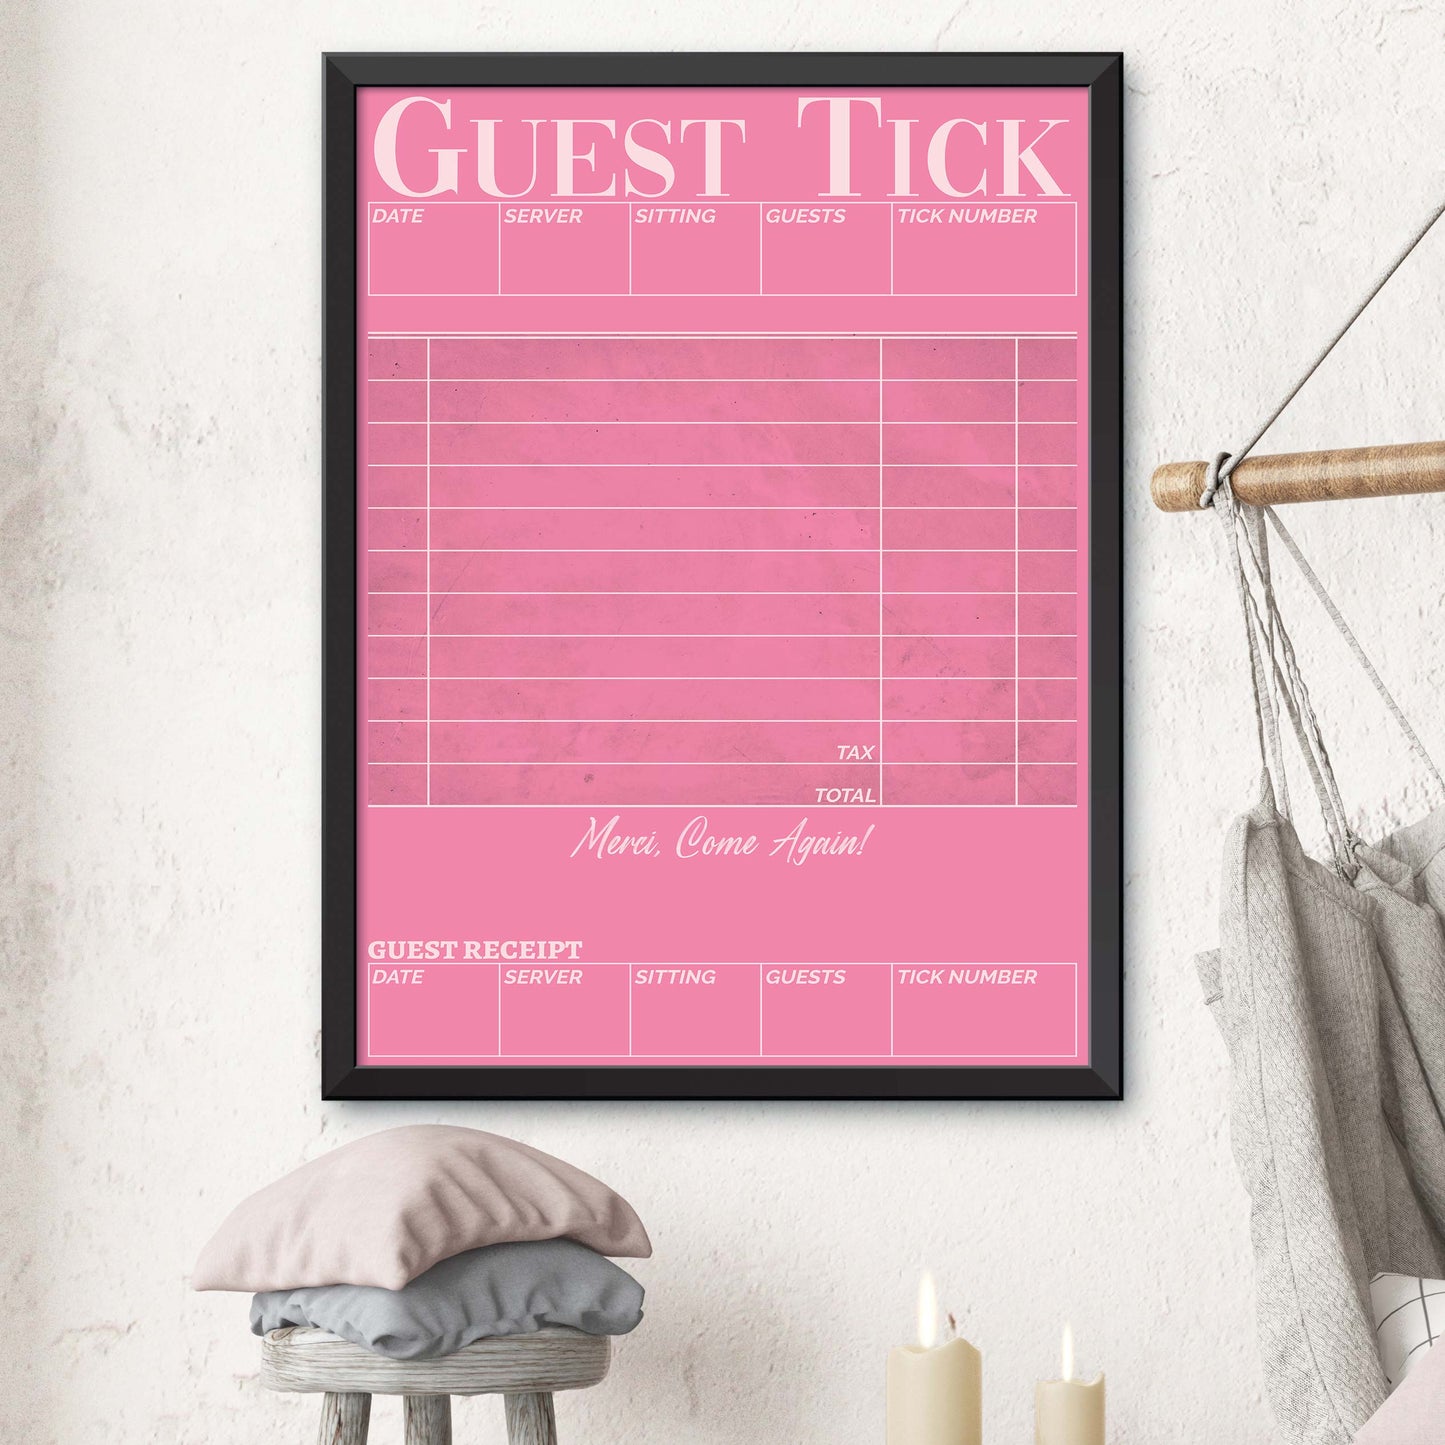 Guest Check Poster